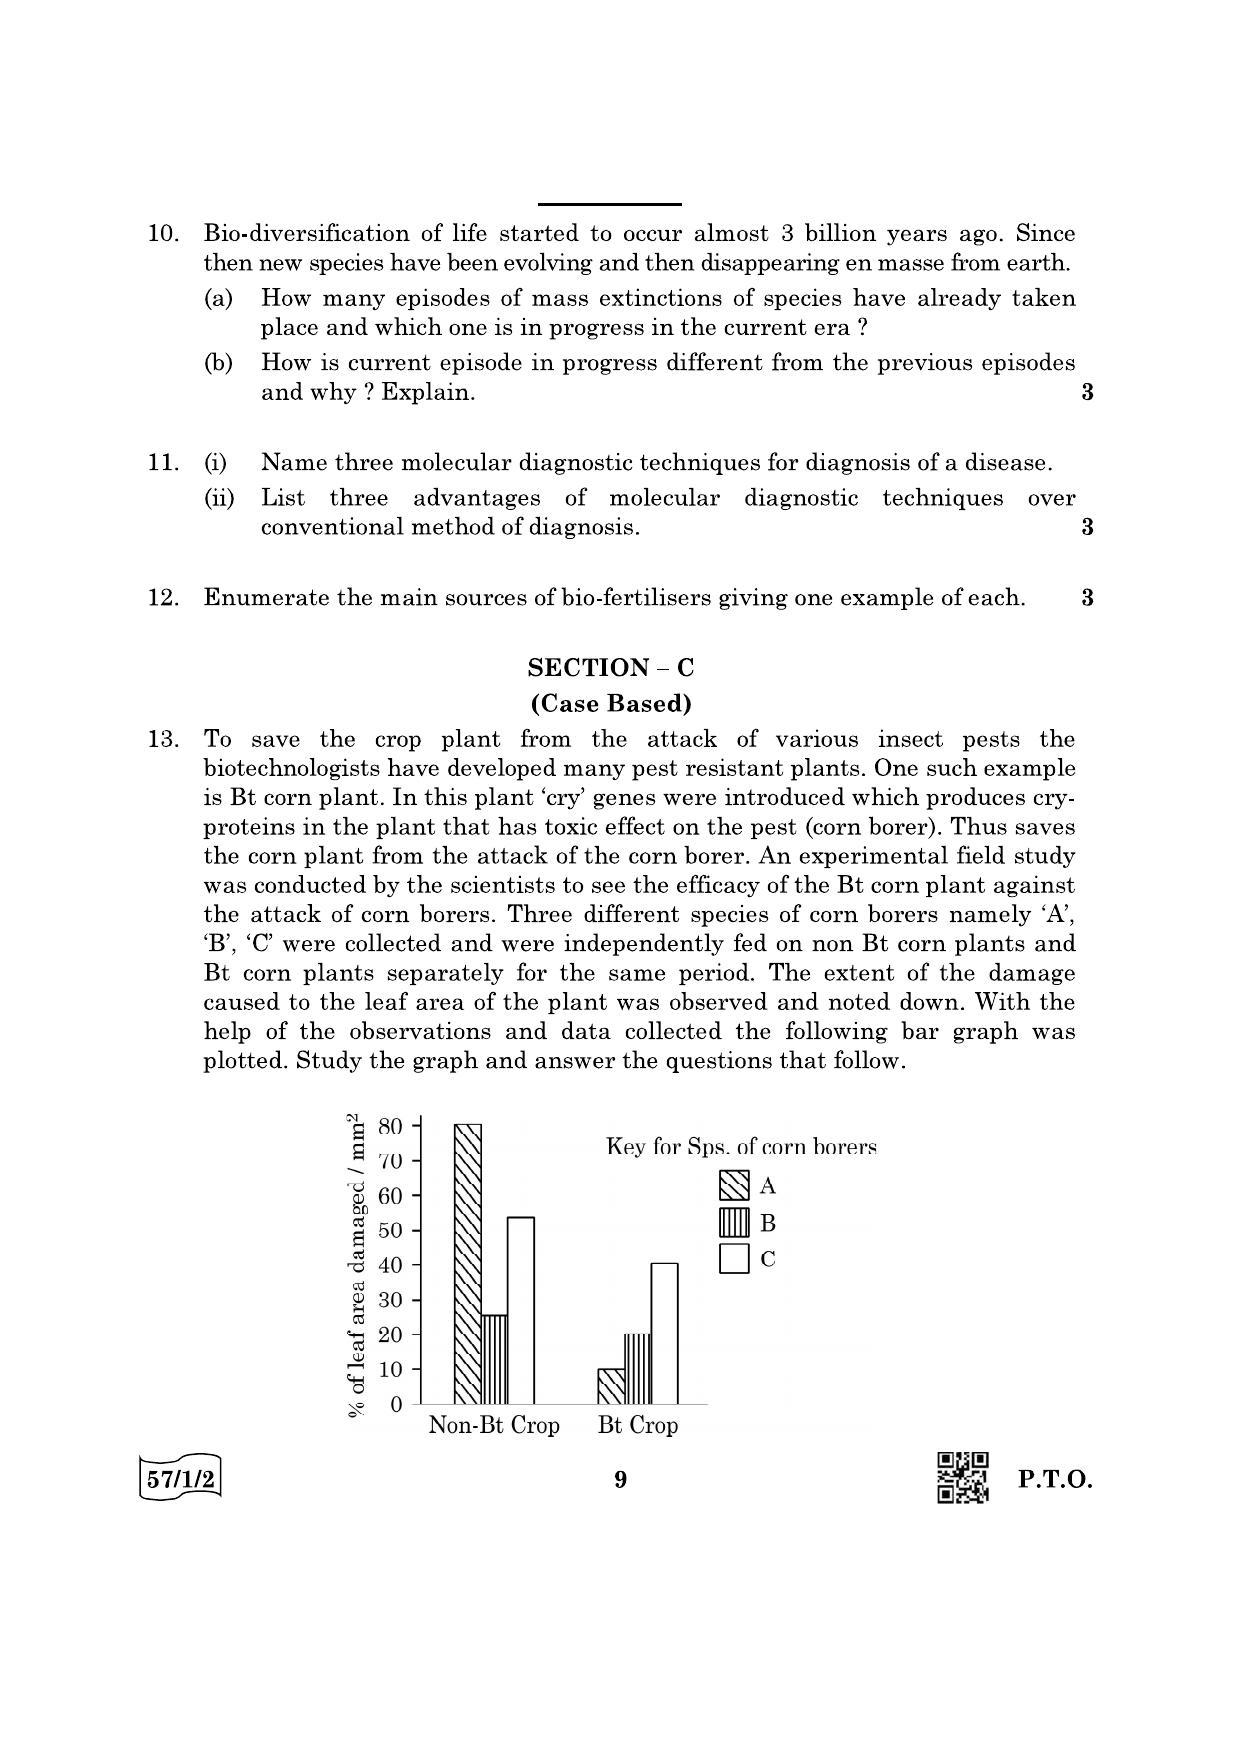 CBSE Class 12 57-1-2 Biology 2022 Question Paper - Page 9